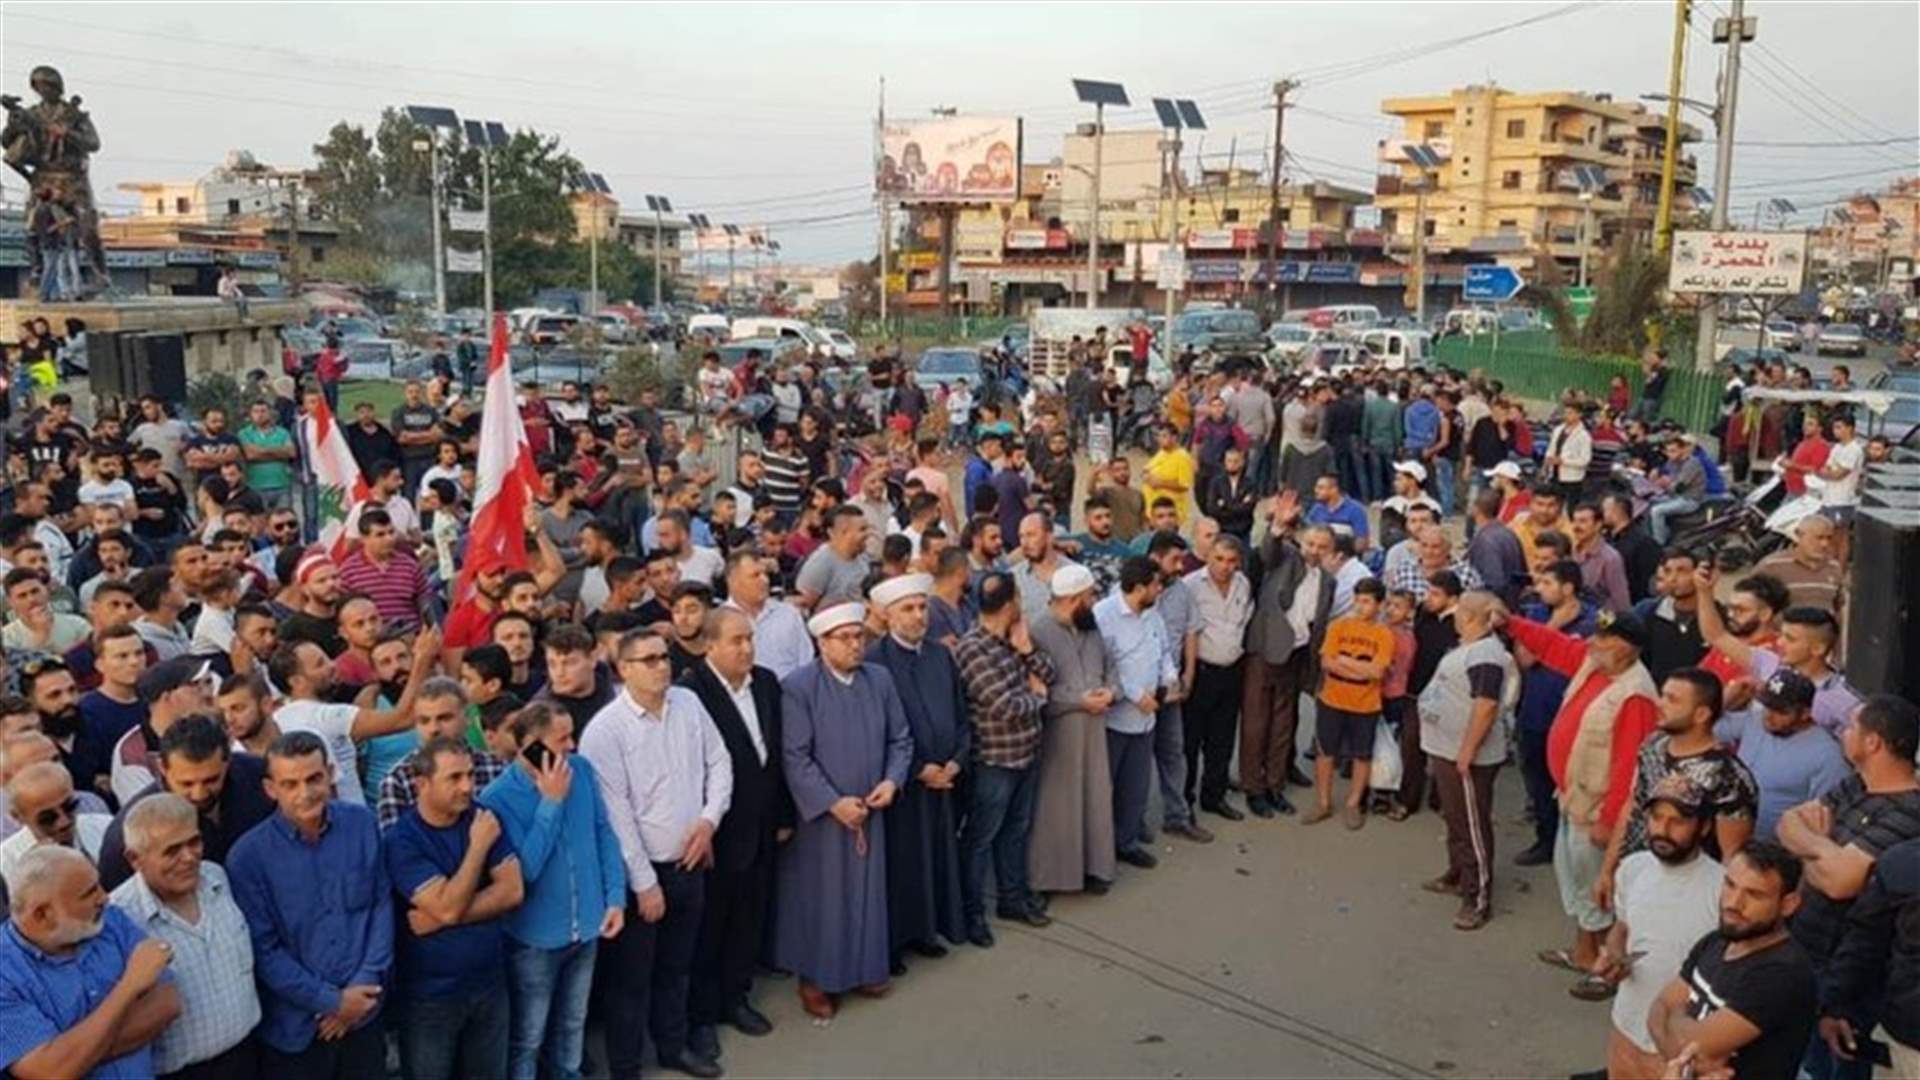 Protesters gather in Abdeh, say determined to stay